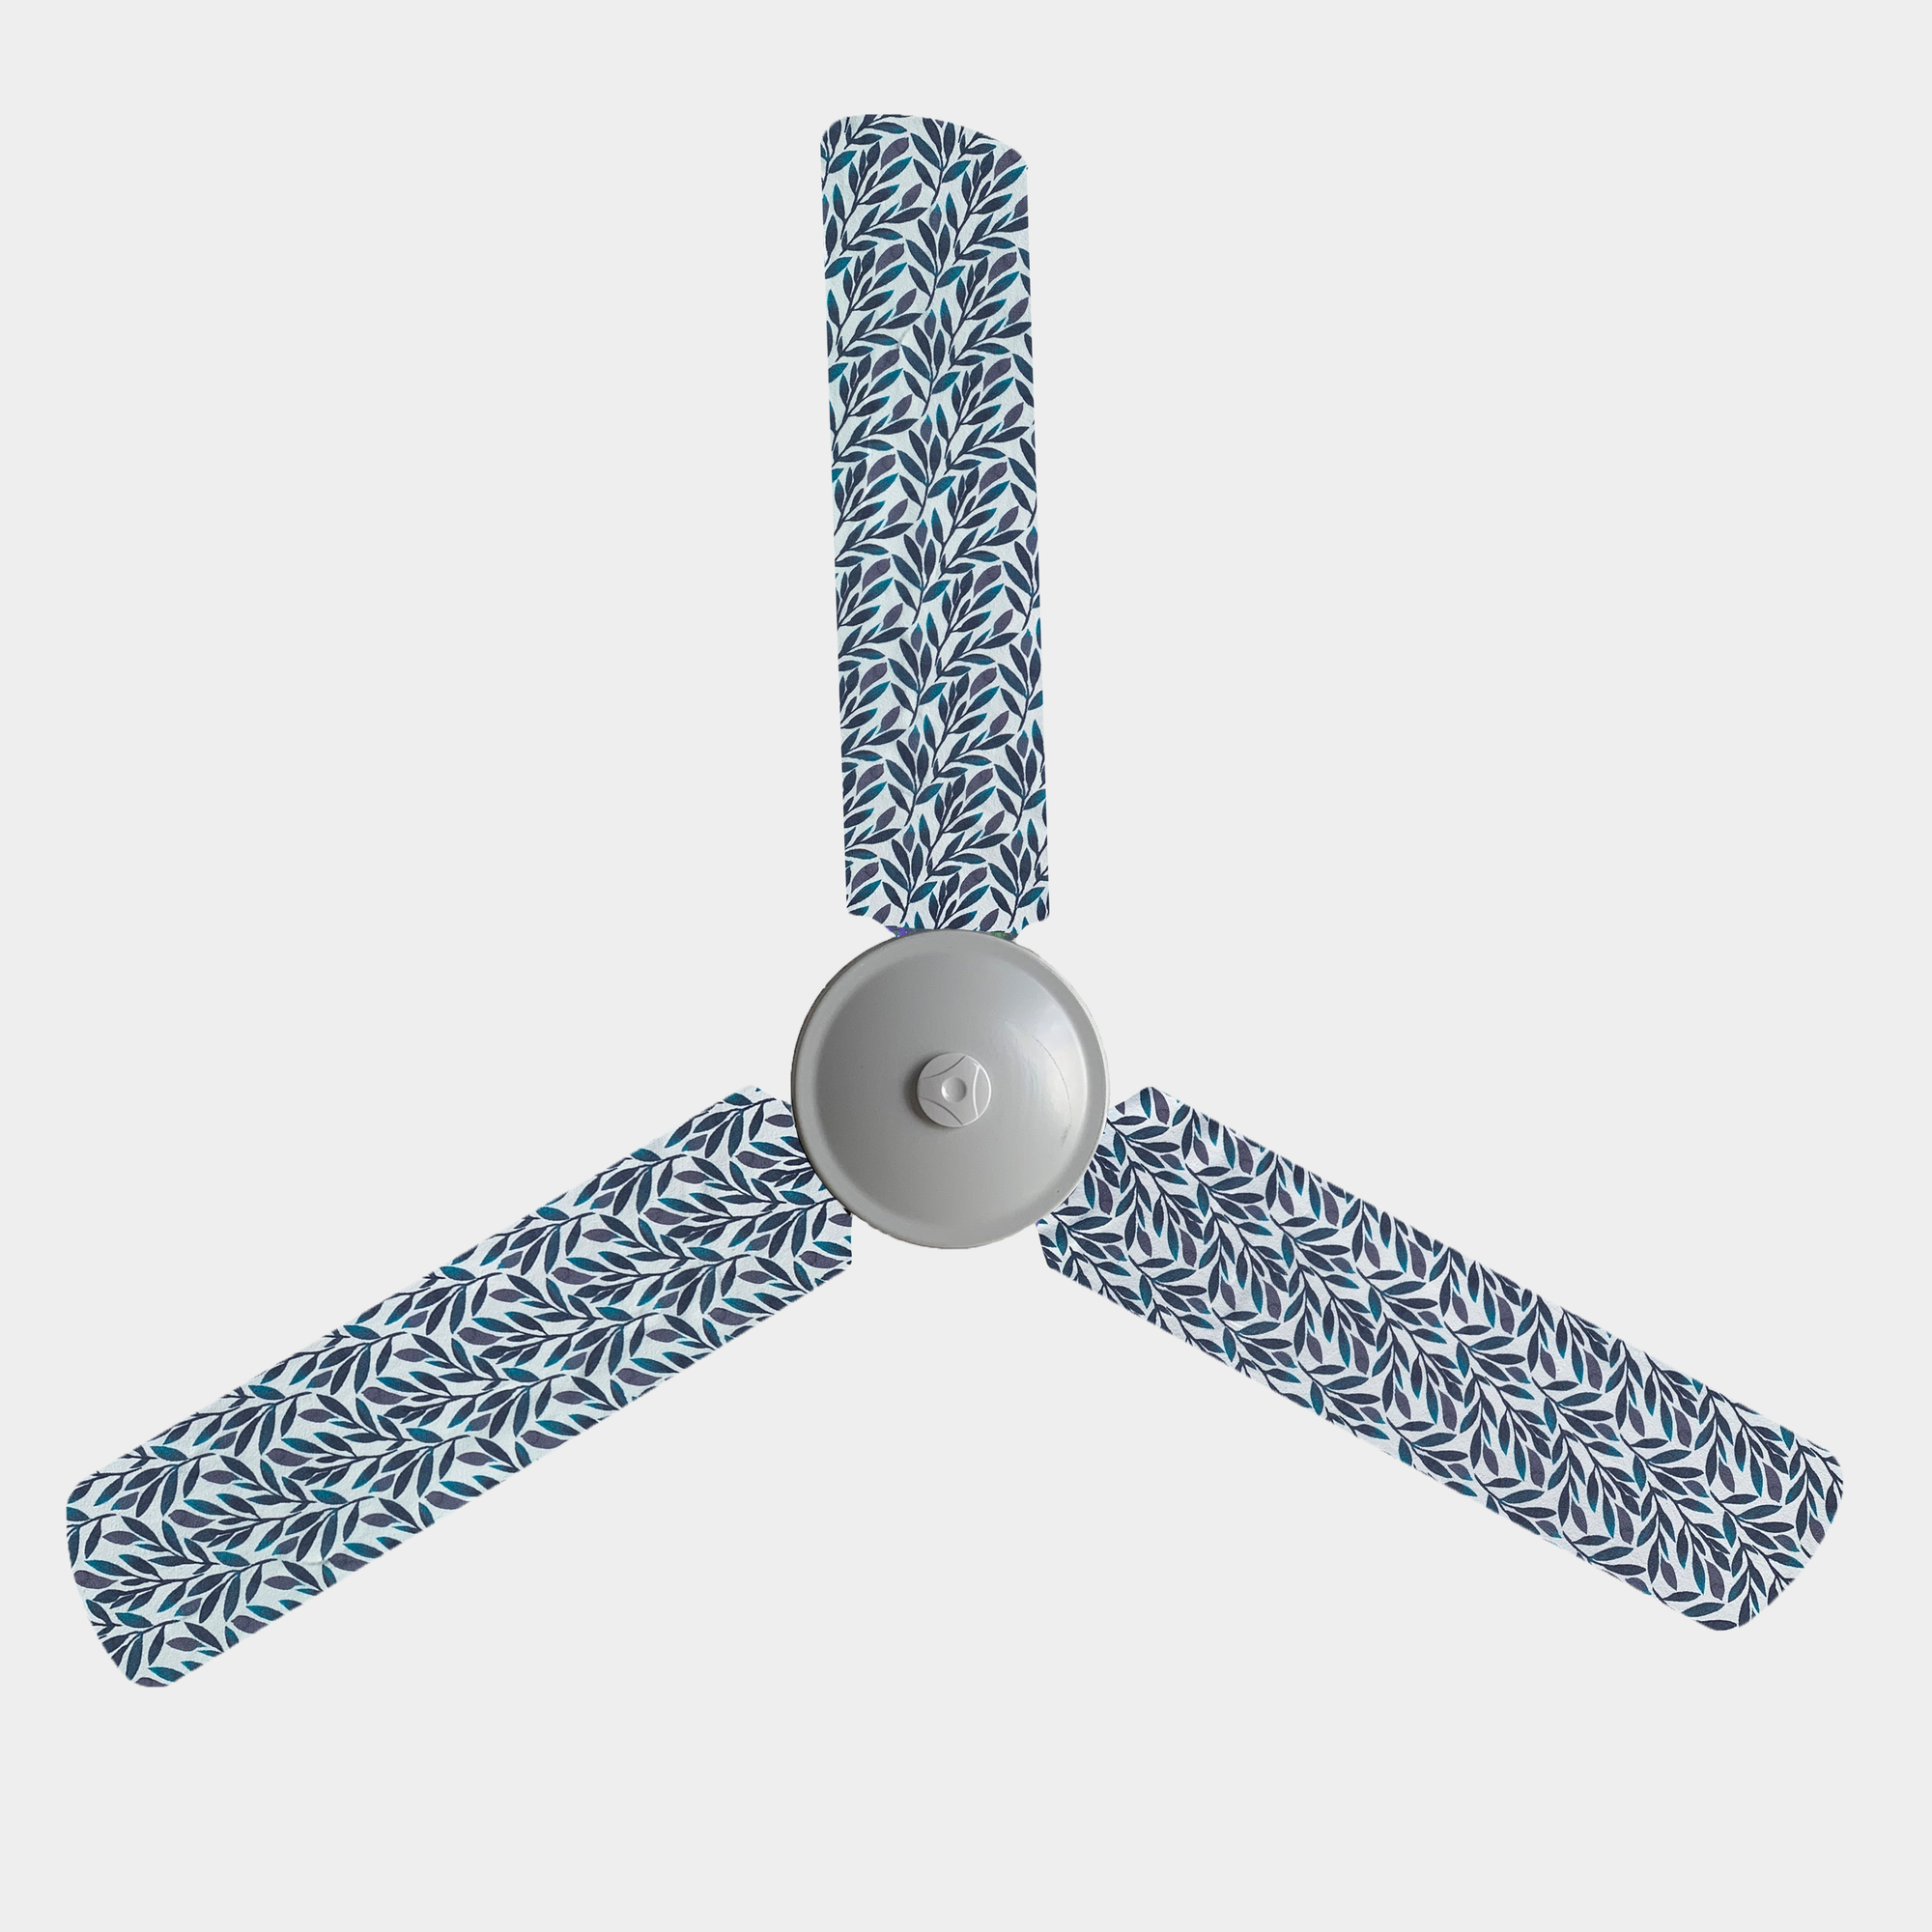 Teal and purple leaves on a branch as a 3 blade fabric ceilinf fan blade cover